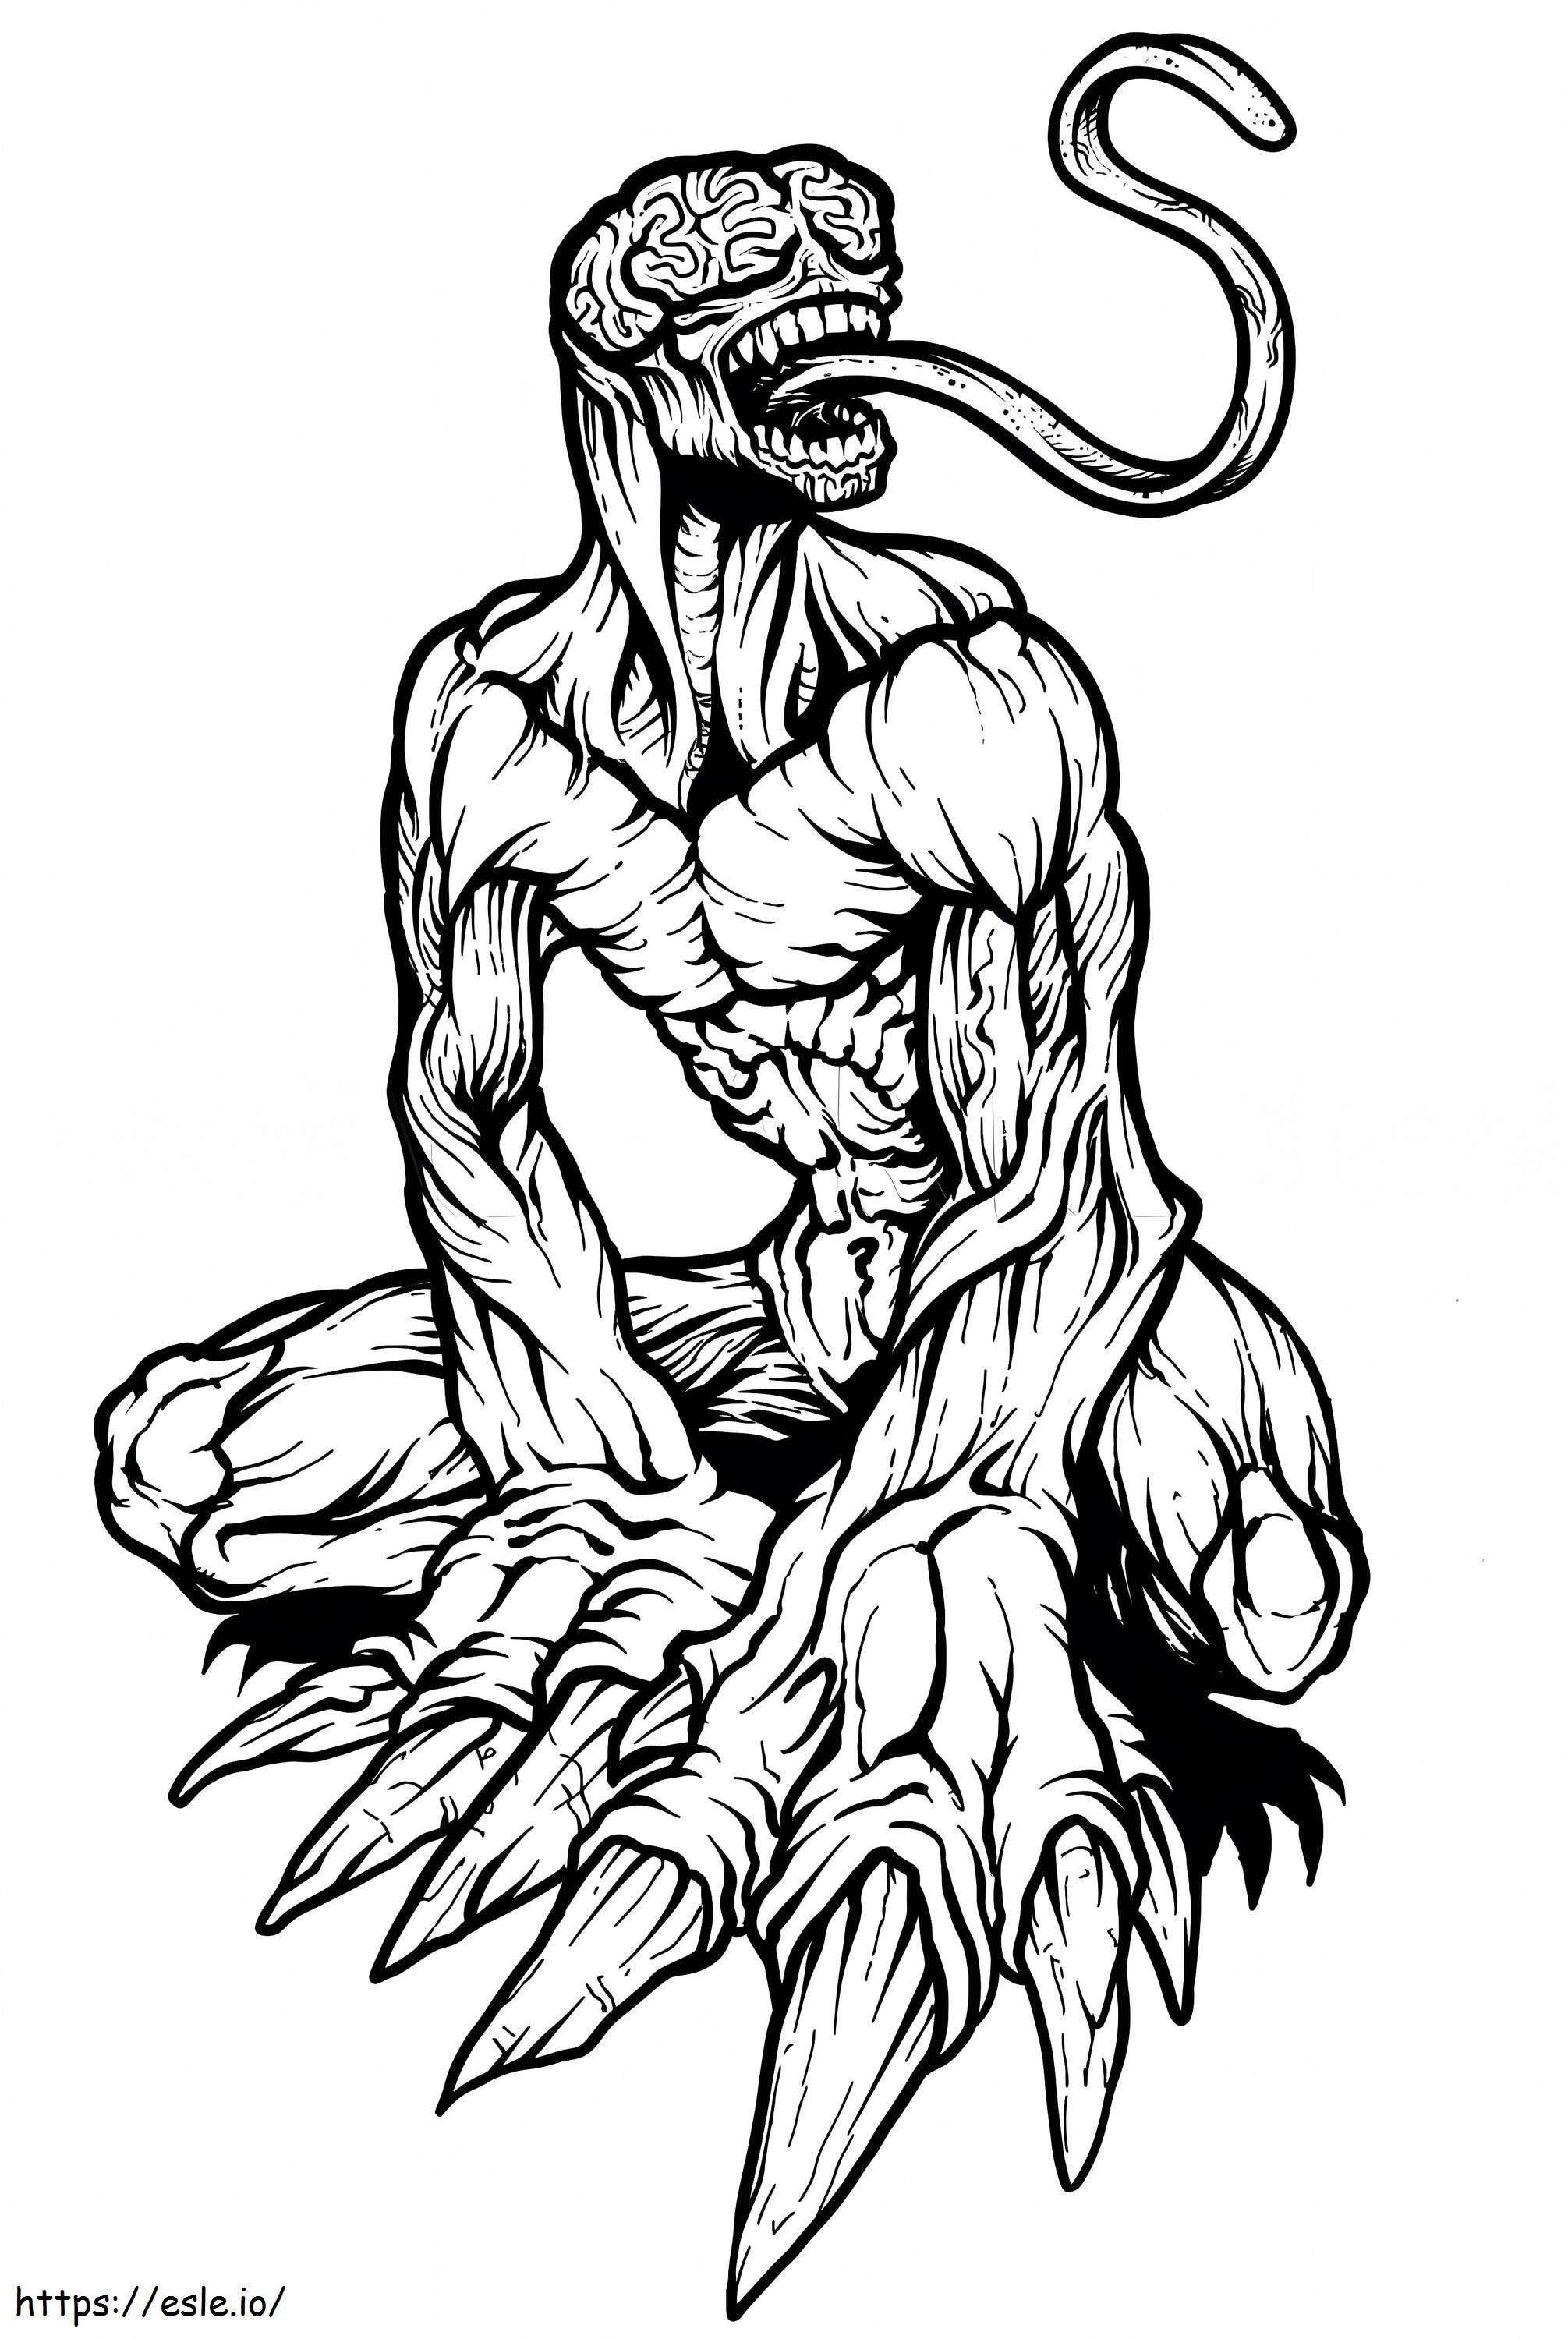 Licker Resident Evil coloring page